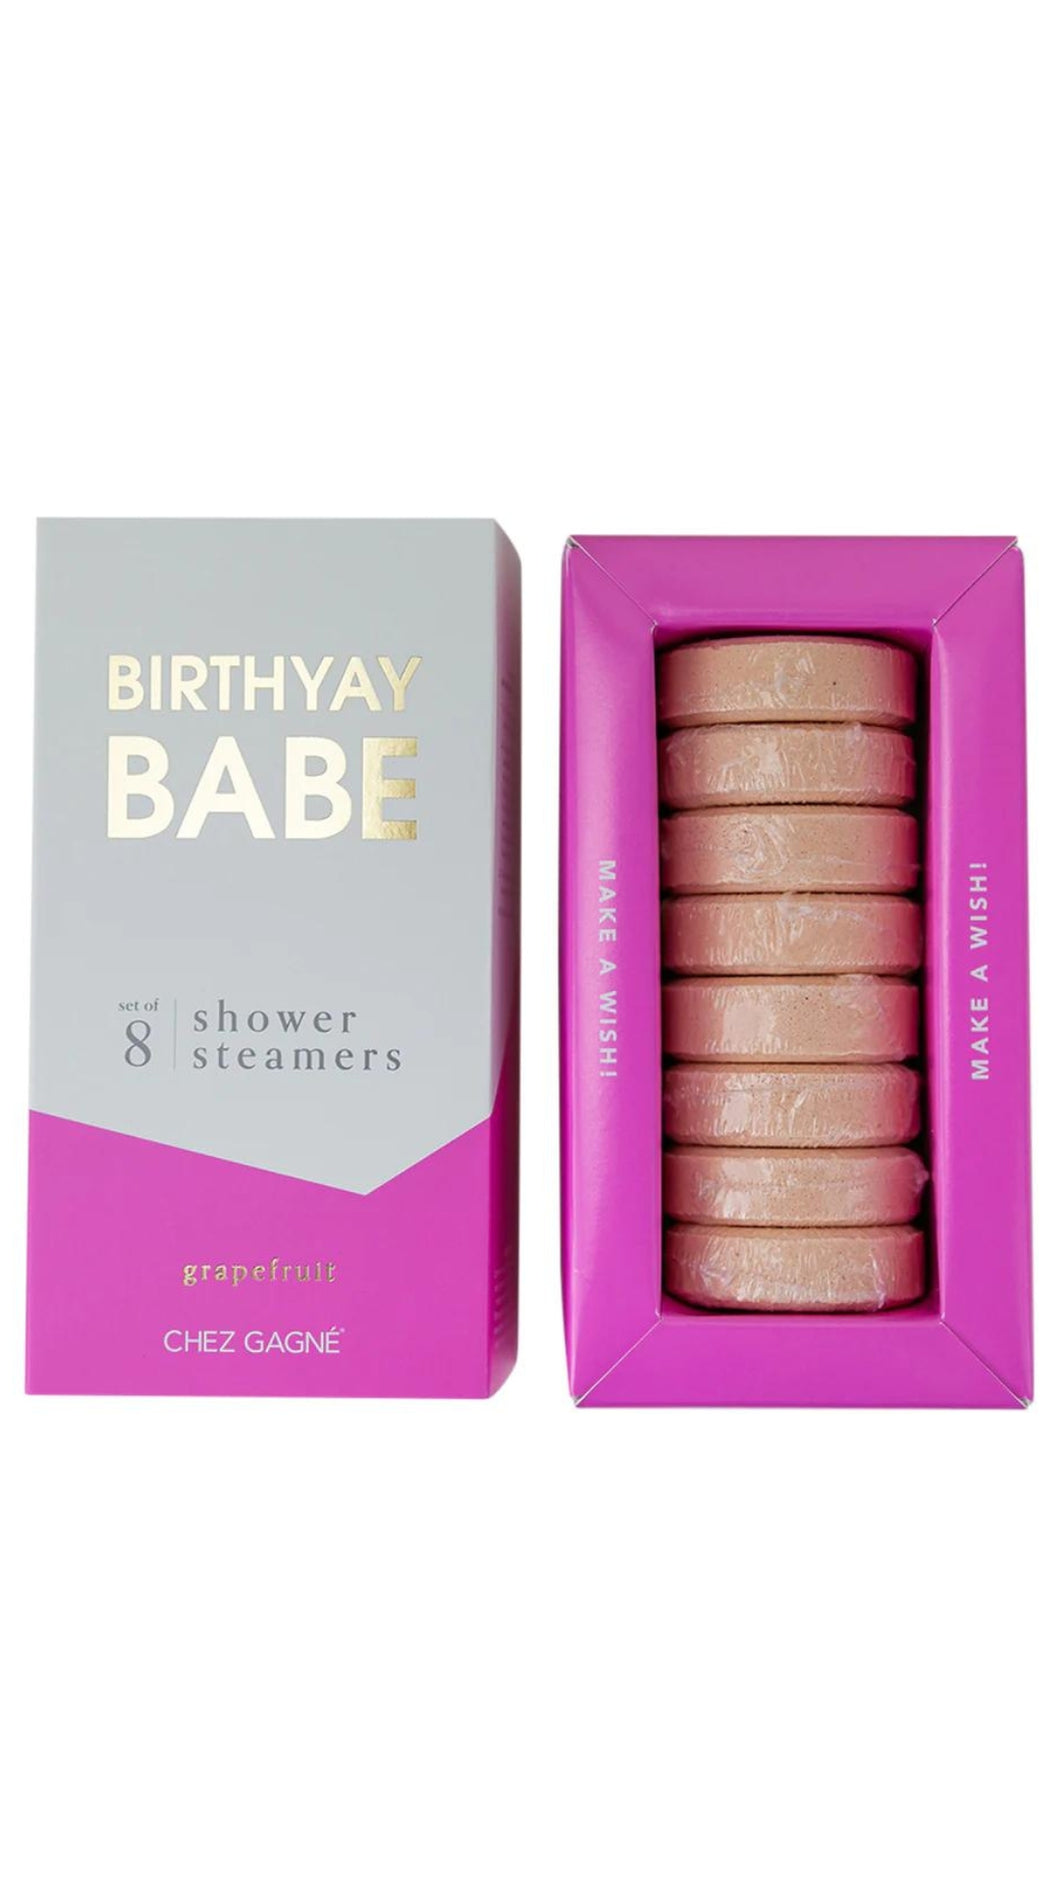 Birthyay Babe Shower Steamers - Grapefruit